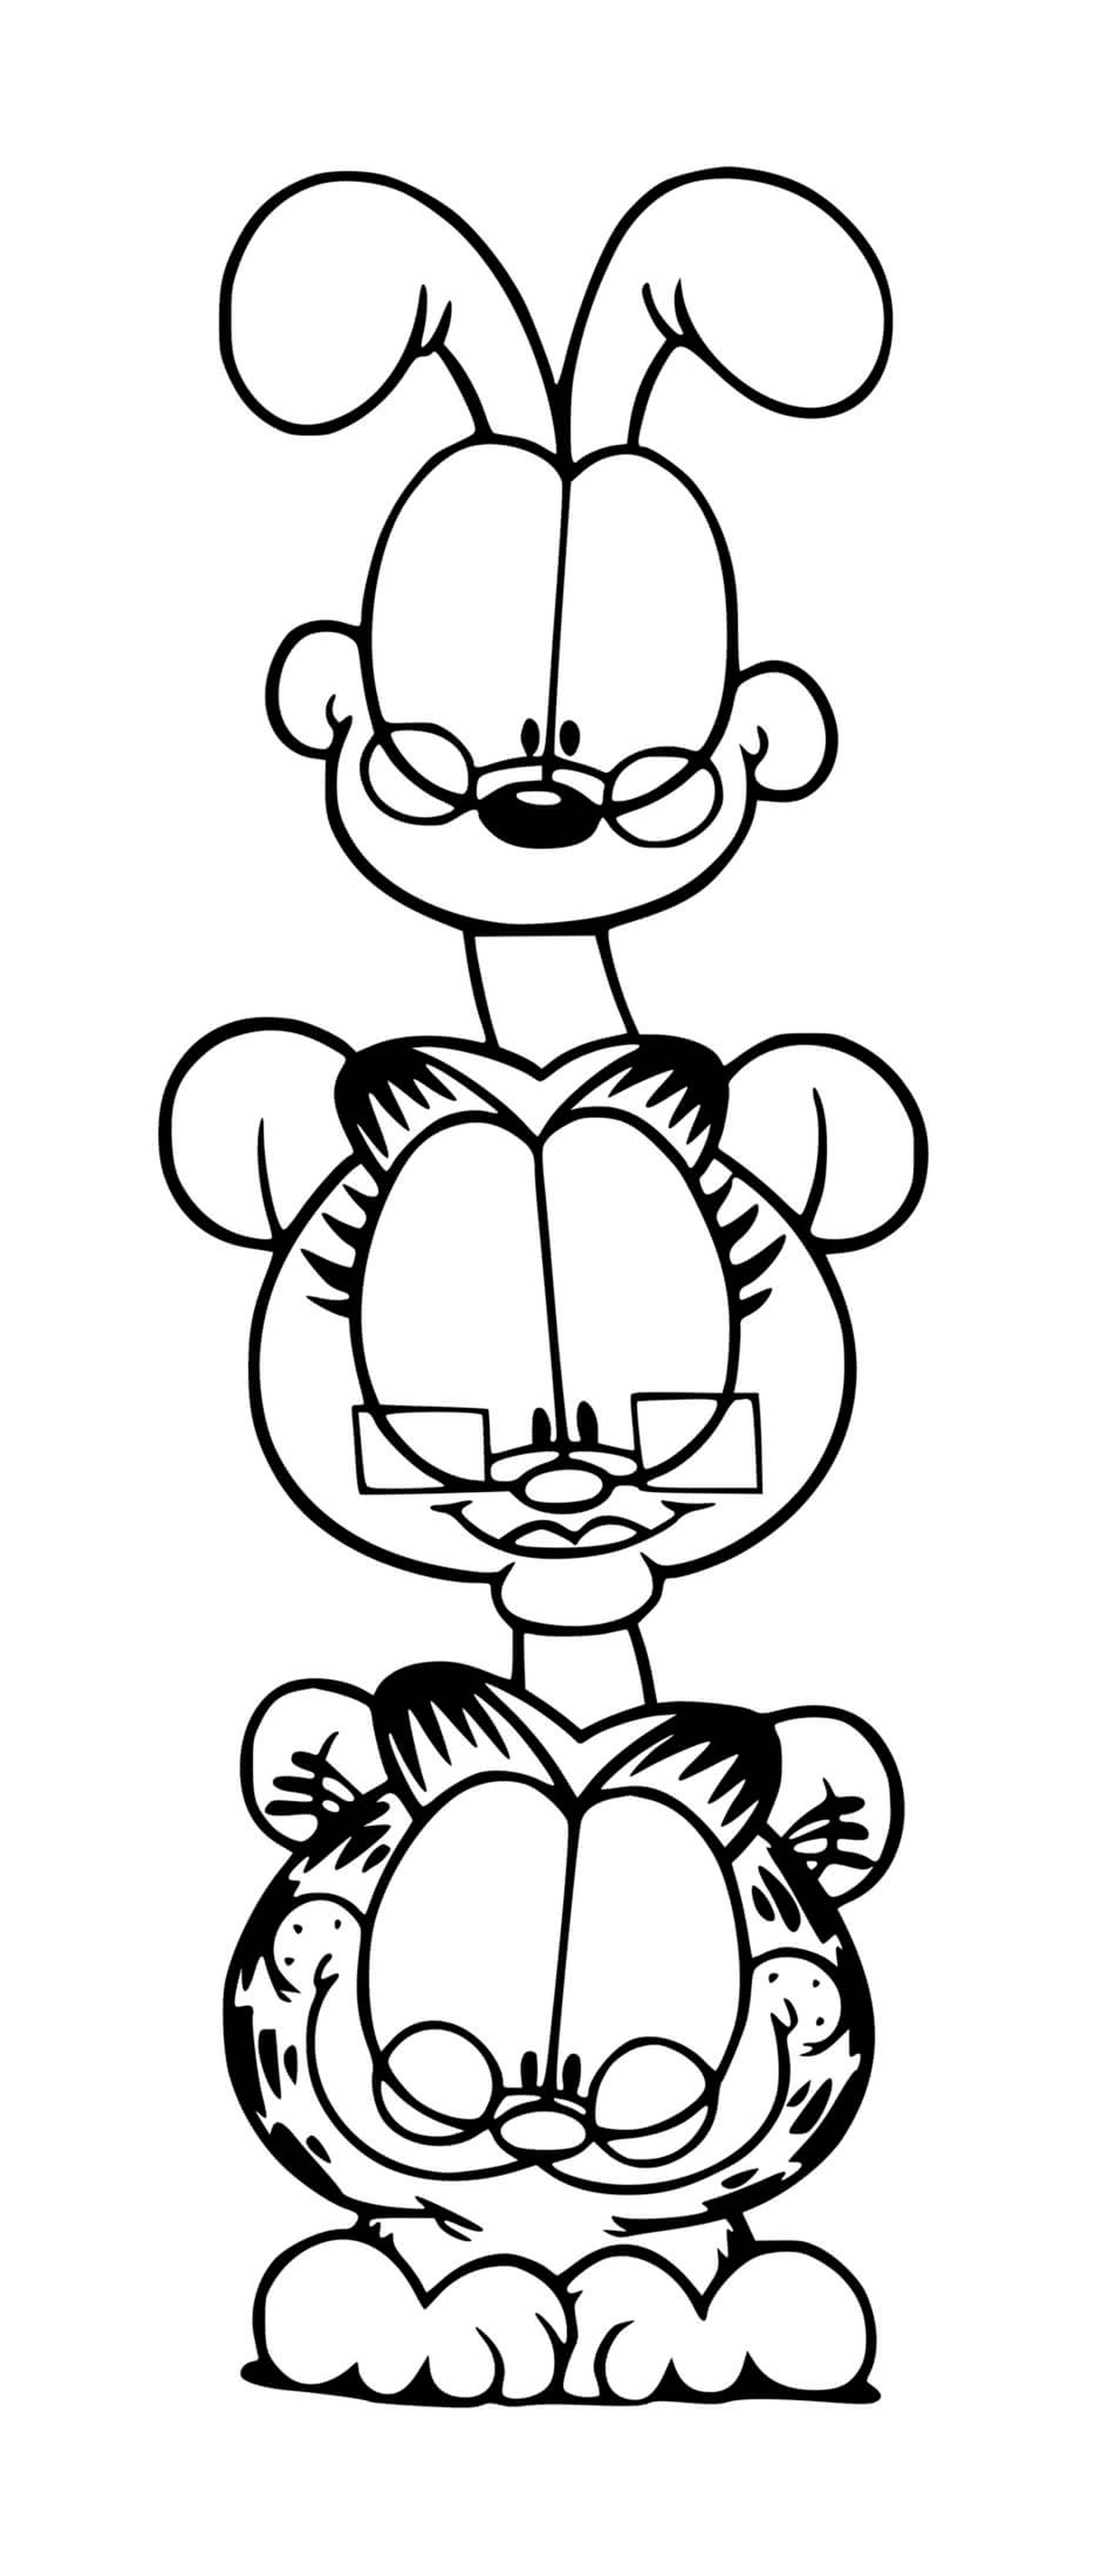  Garfield, Odie and Nermal as accomplices 